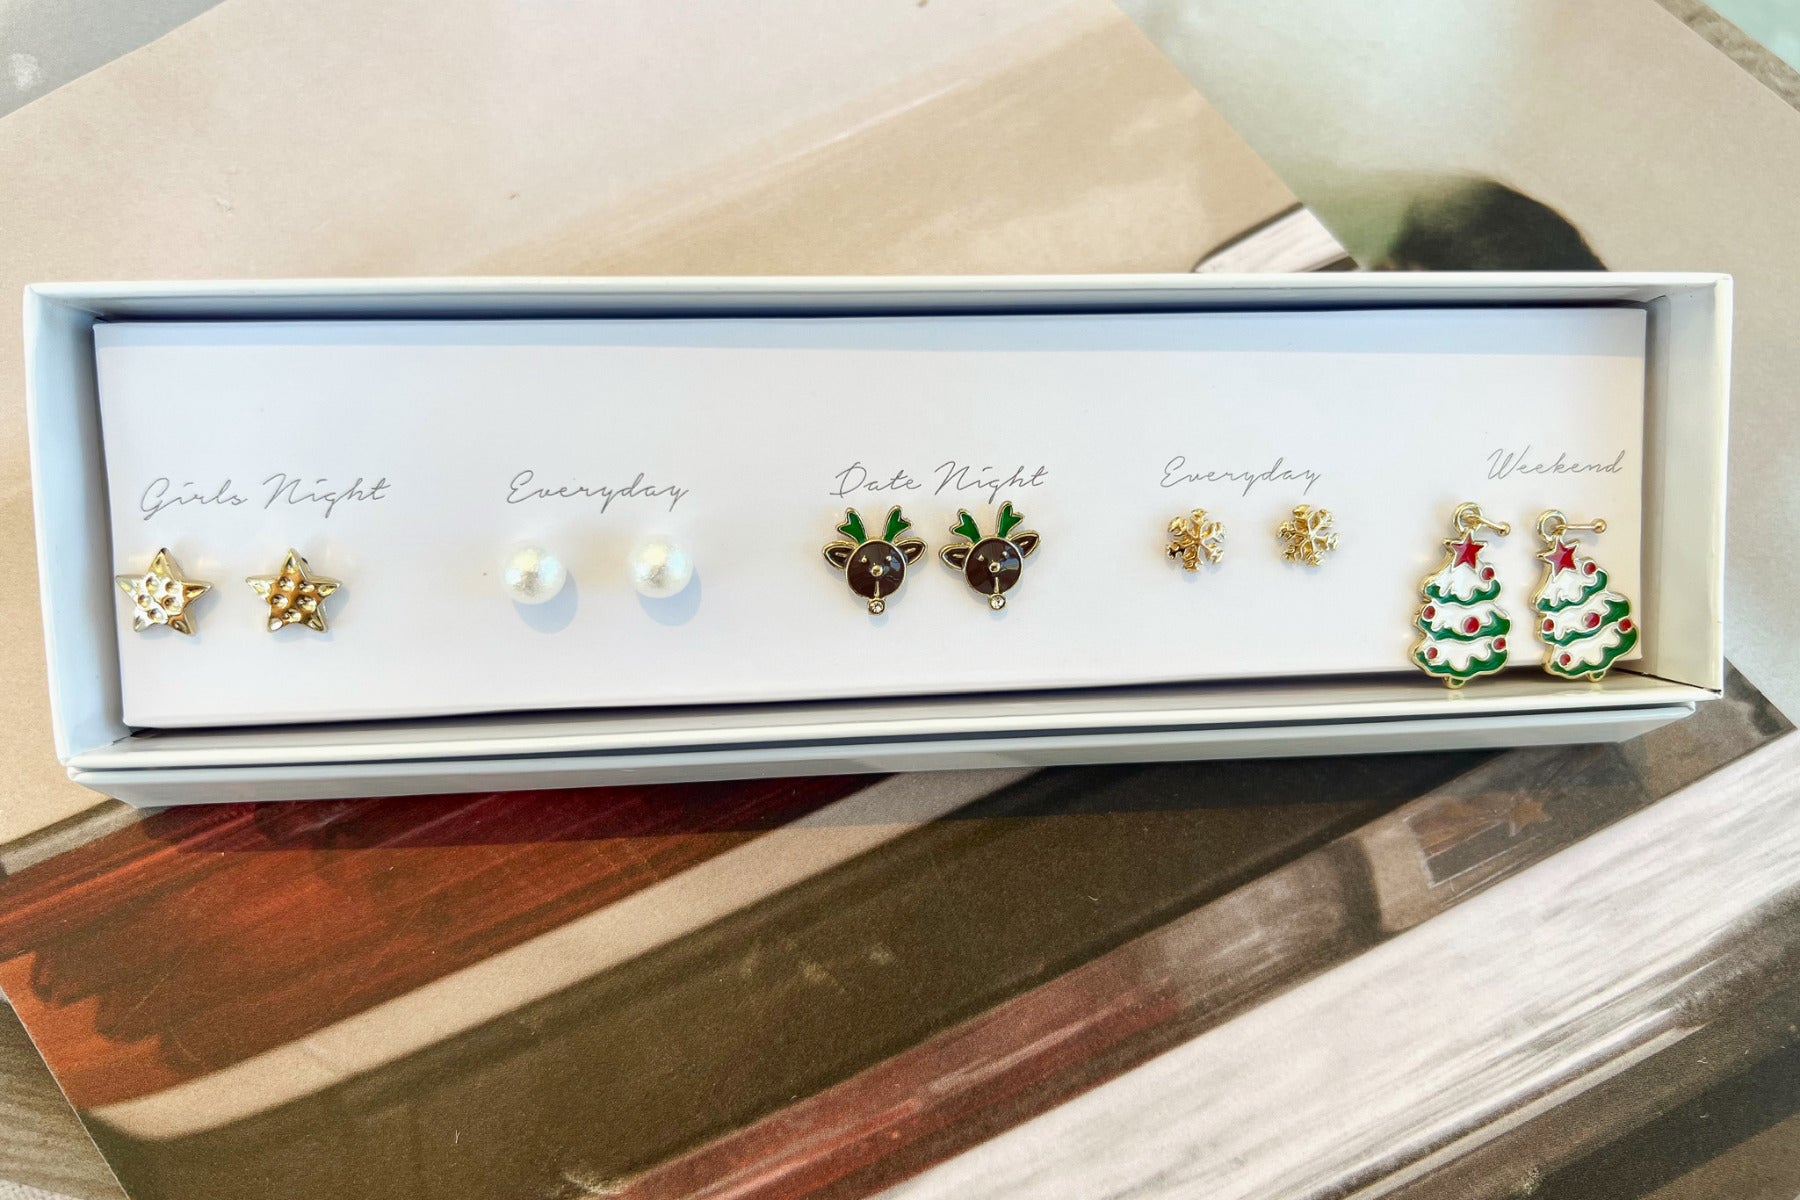 Top view of the Merry and Bright Earring Set, packaged in a white box with "Girls night, everyday, date night, everyday, and weekend" text. It includes 5 pairs of earrings, with gold stars, pearls, reindeer, snowflakes, and Christmas trees